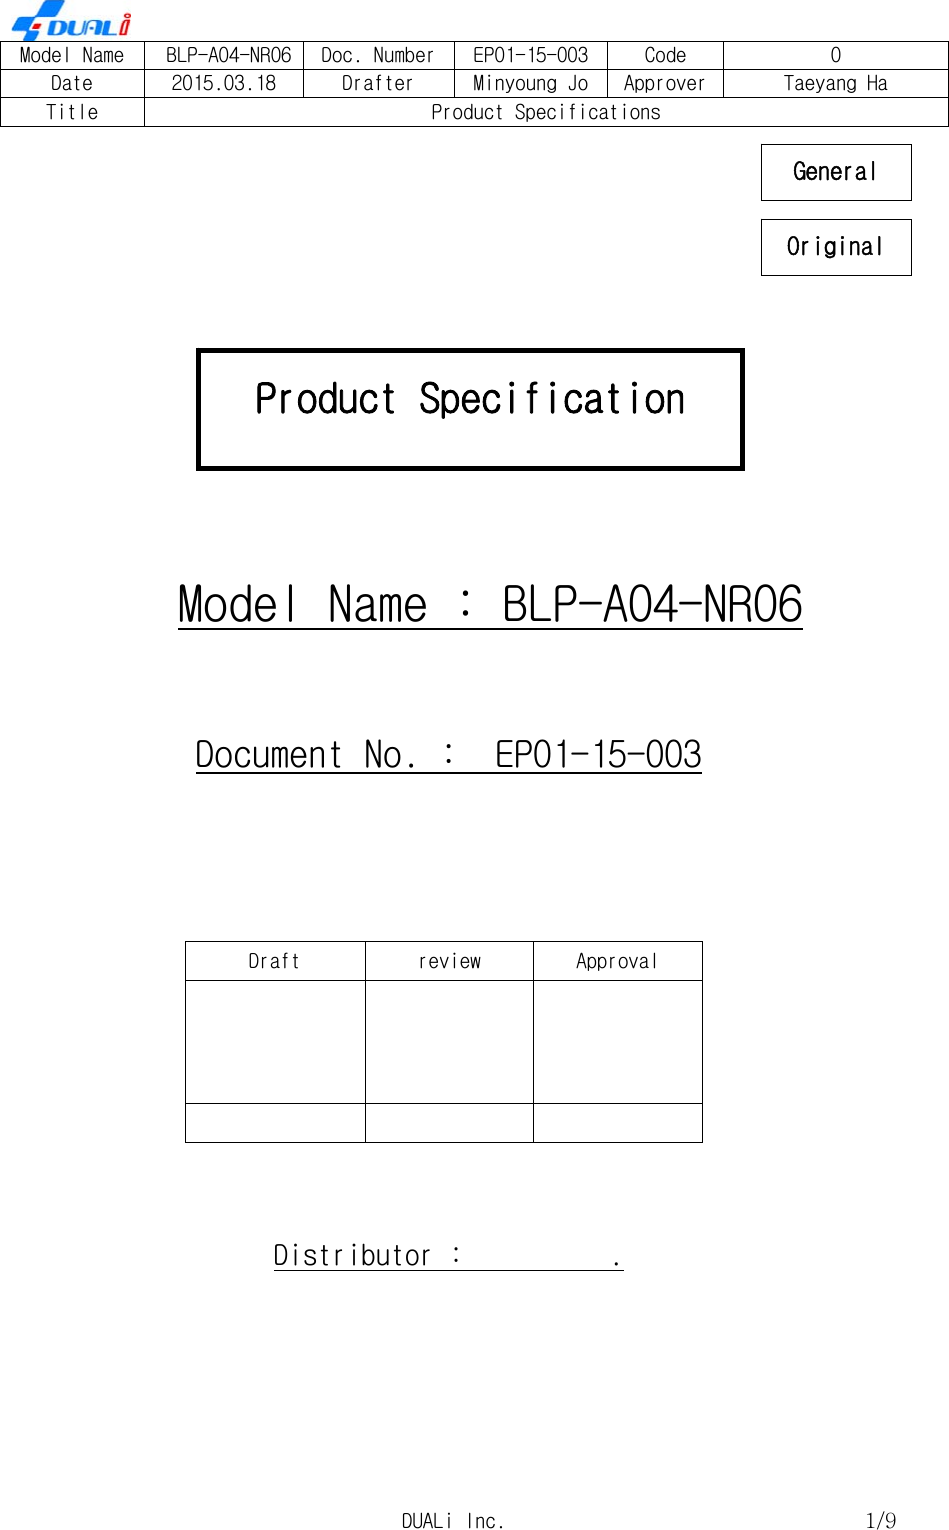     Model Name  BLP-A04-NR06  Doc. Number EP01-15-003  Code  0 Date  2015.03.18  Drafter  Minyoung Jo  Approver Taeyang Ha Title  Product Specifications    DUALi Inc.  1/9             Model Name : BLP-A04-NR06  Document No. :  EP01-15-003   Draft  review  Approval        Distributor :          .   Product Specification Original General 